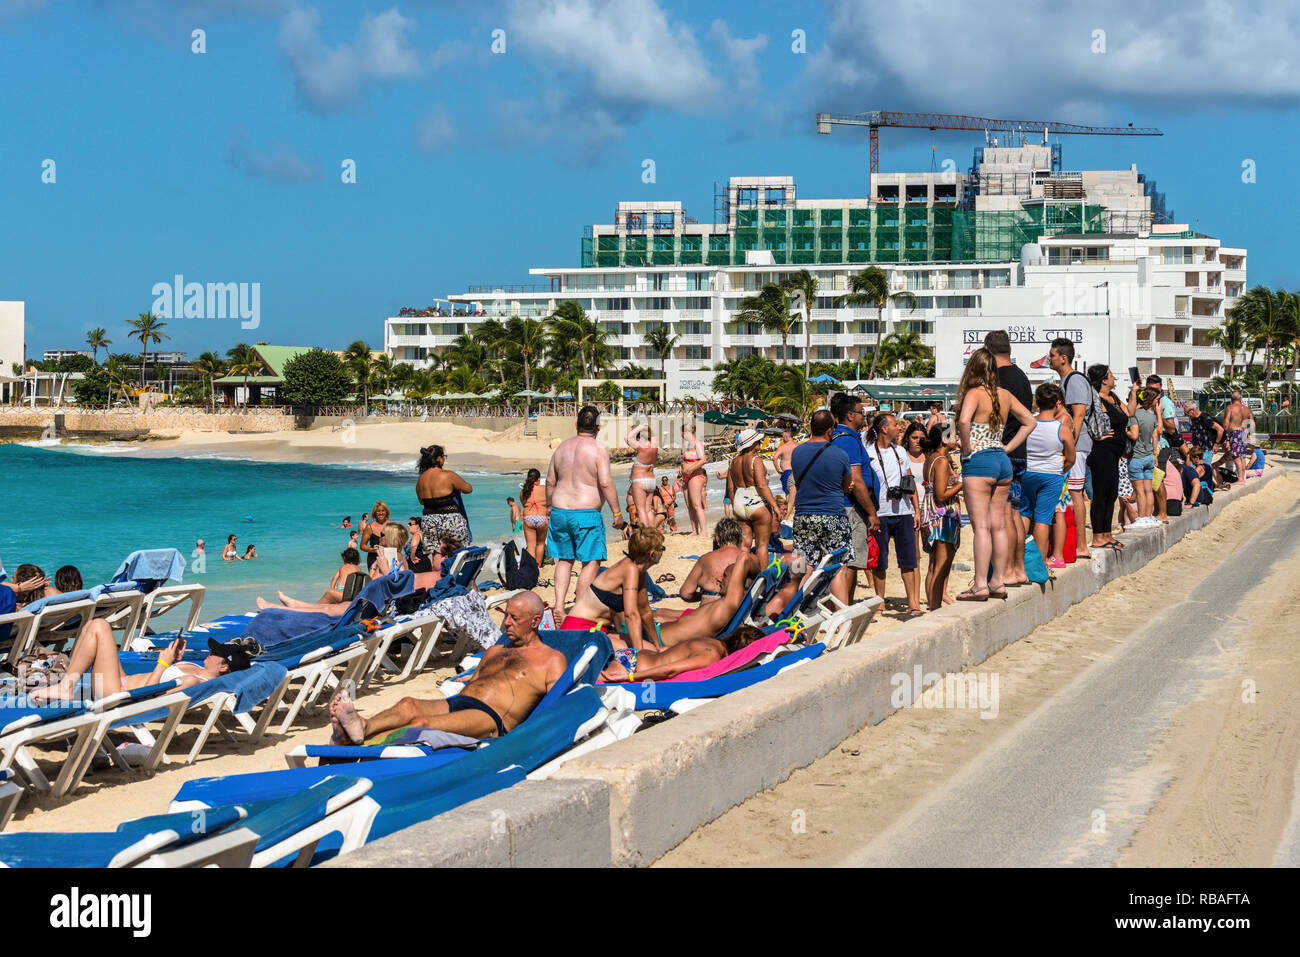 St. Maarten, Netherlands - December 17, 2018: People on Maho beach are waiting for the planes to land at the Princess Juliana airport in Sint Maarten  Stock Photo